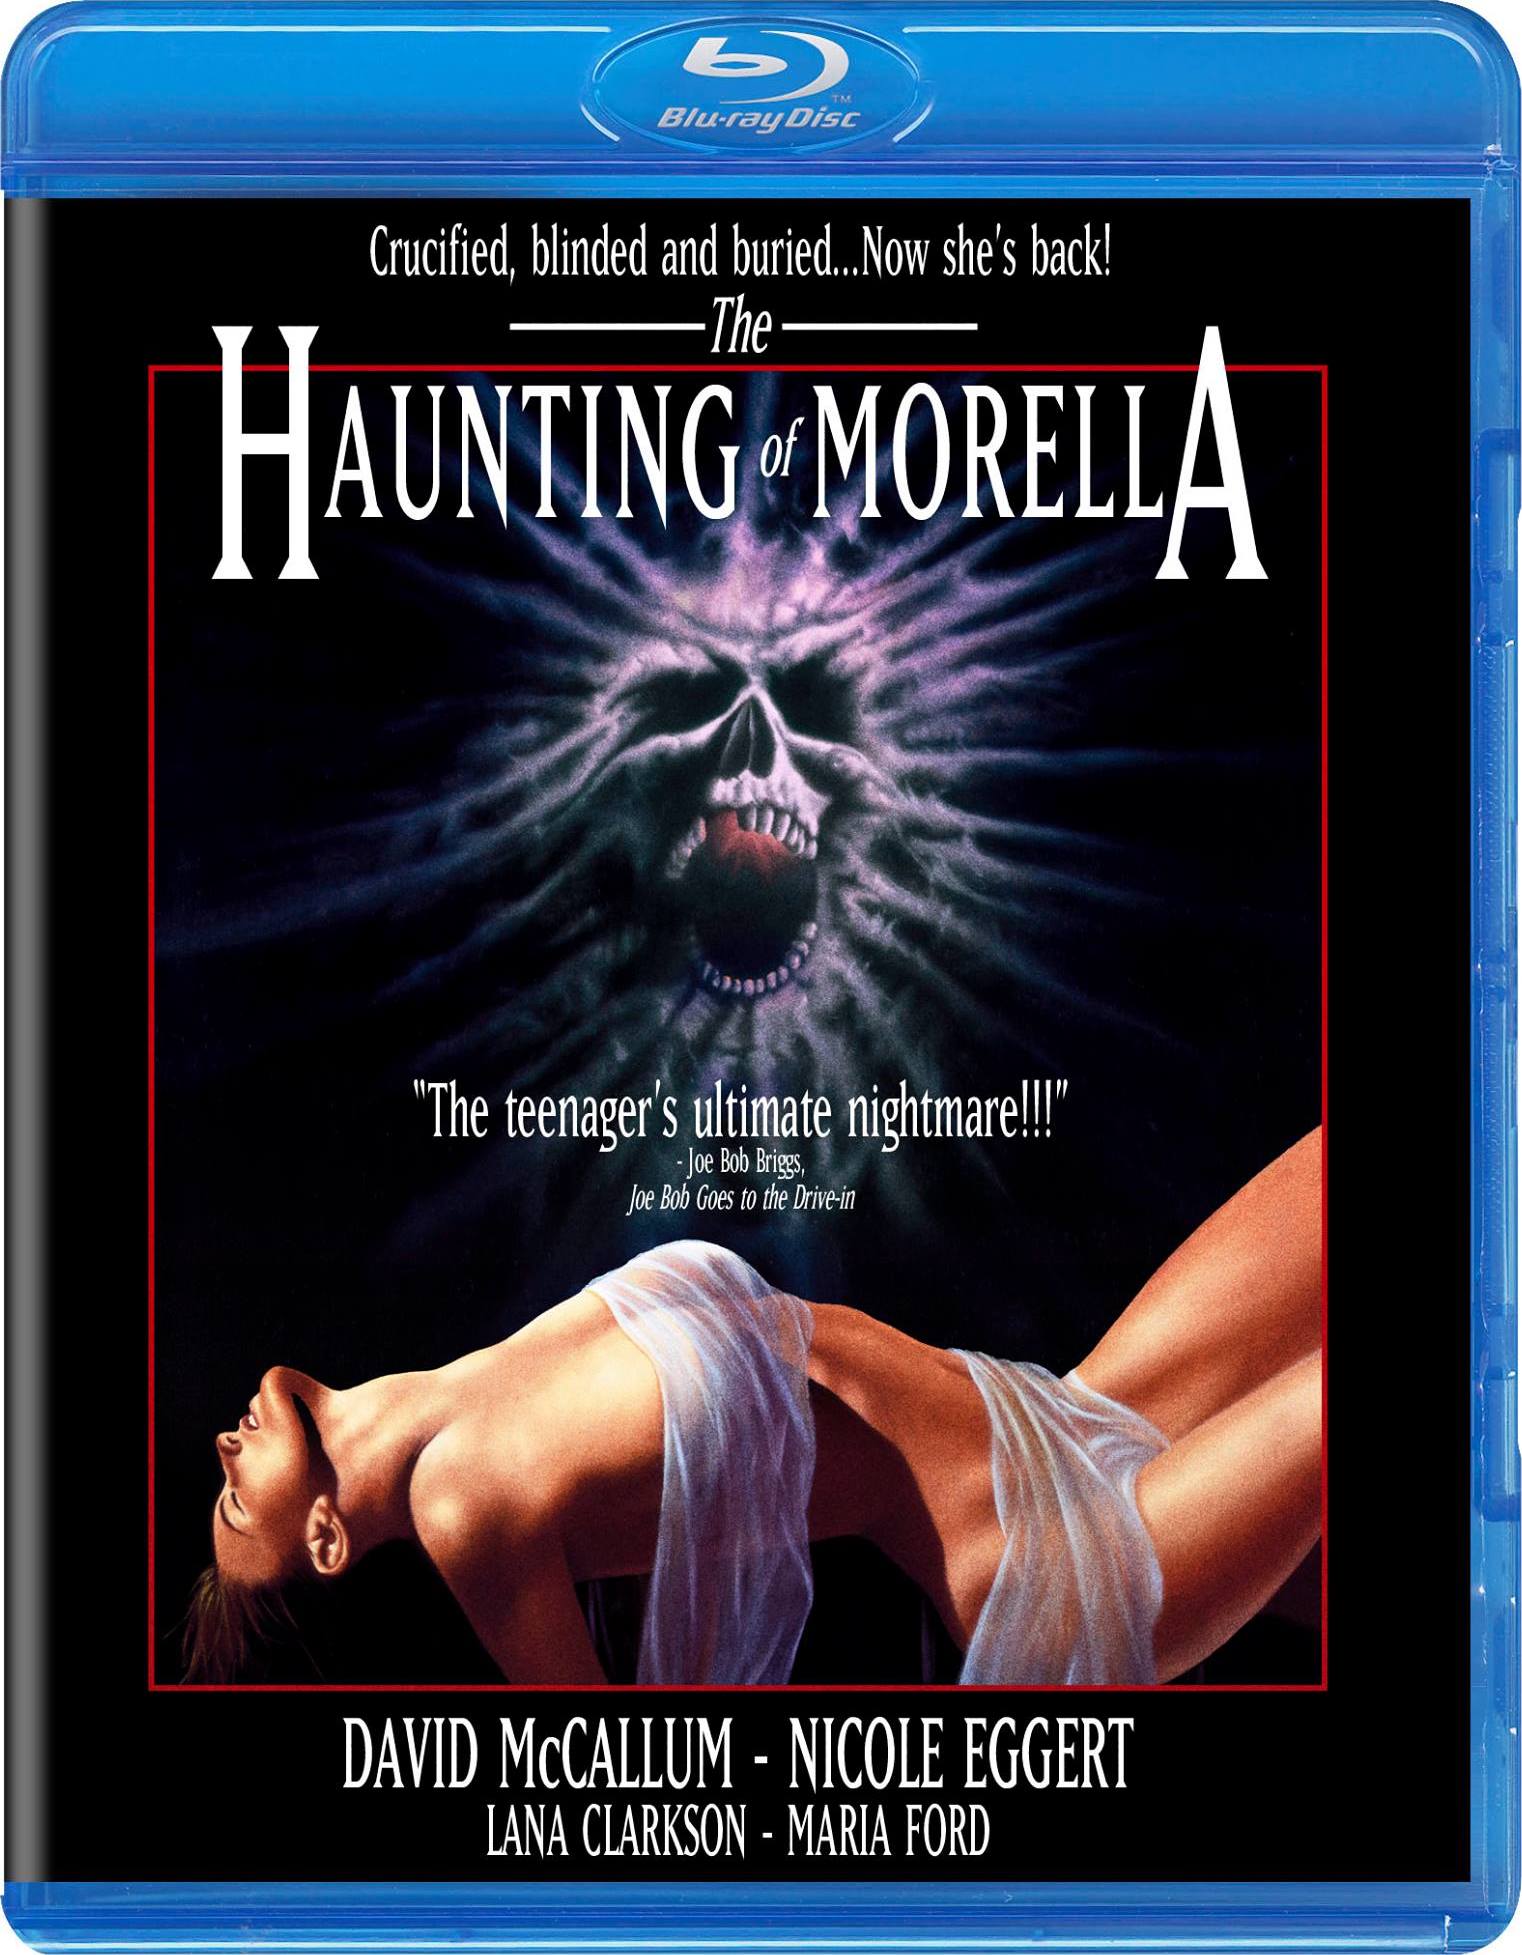 The Haunting of Morella (1990) - Blu-ray Review